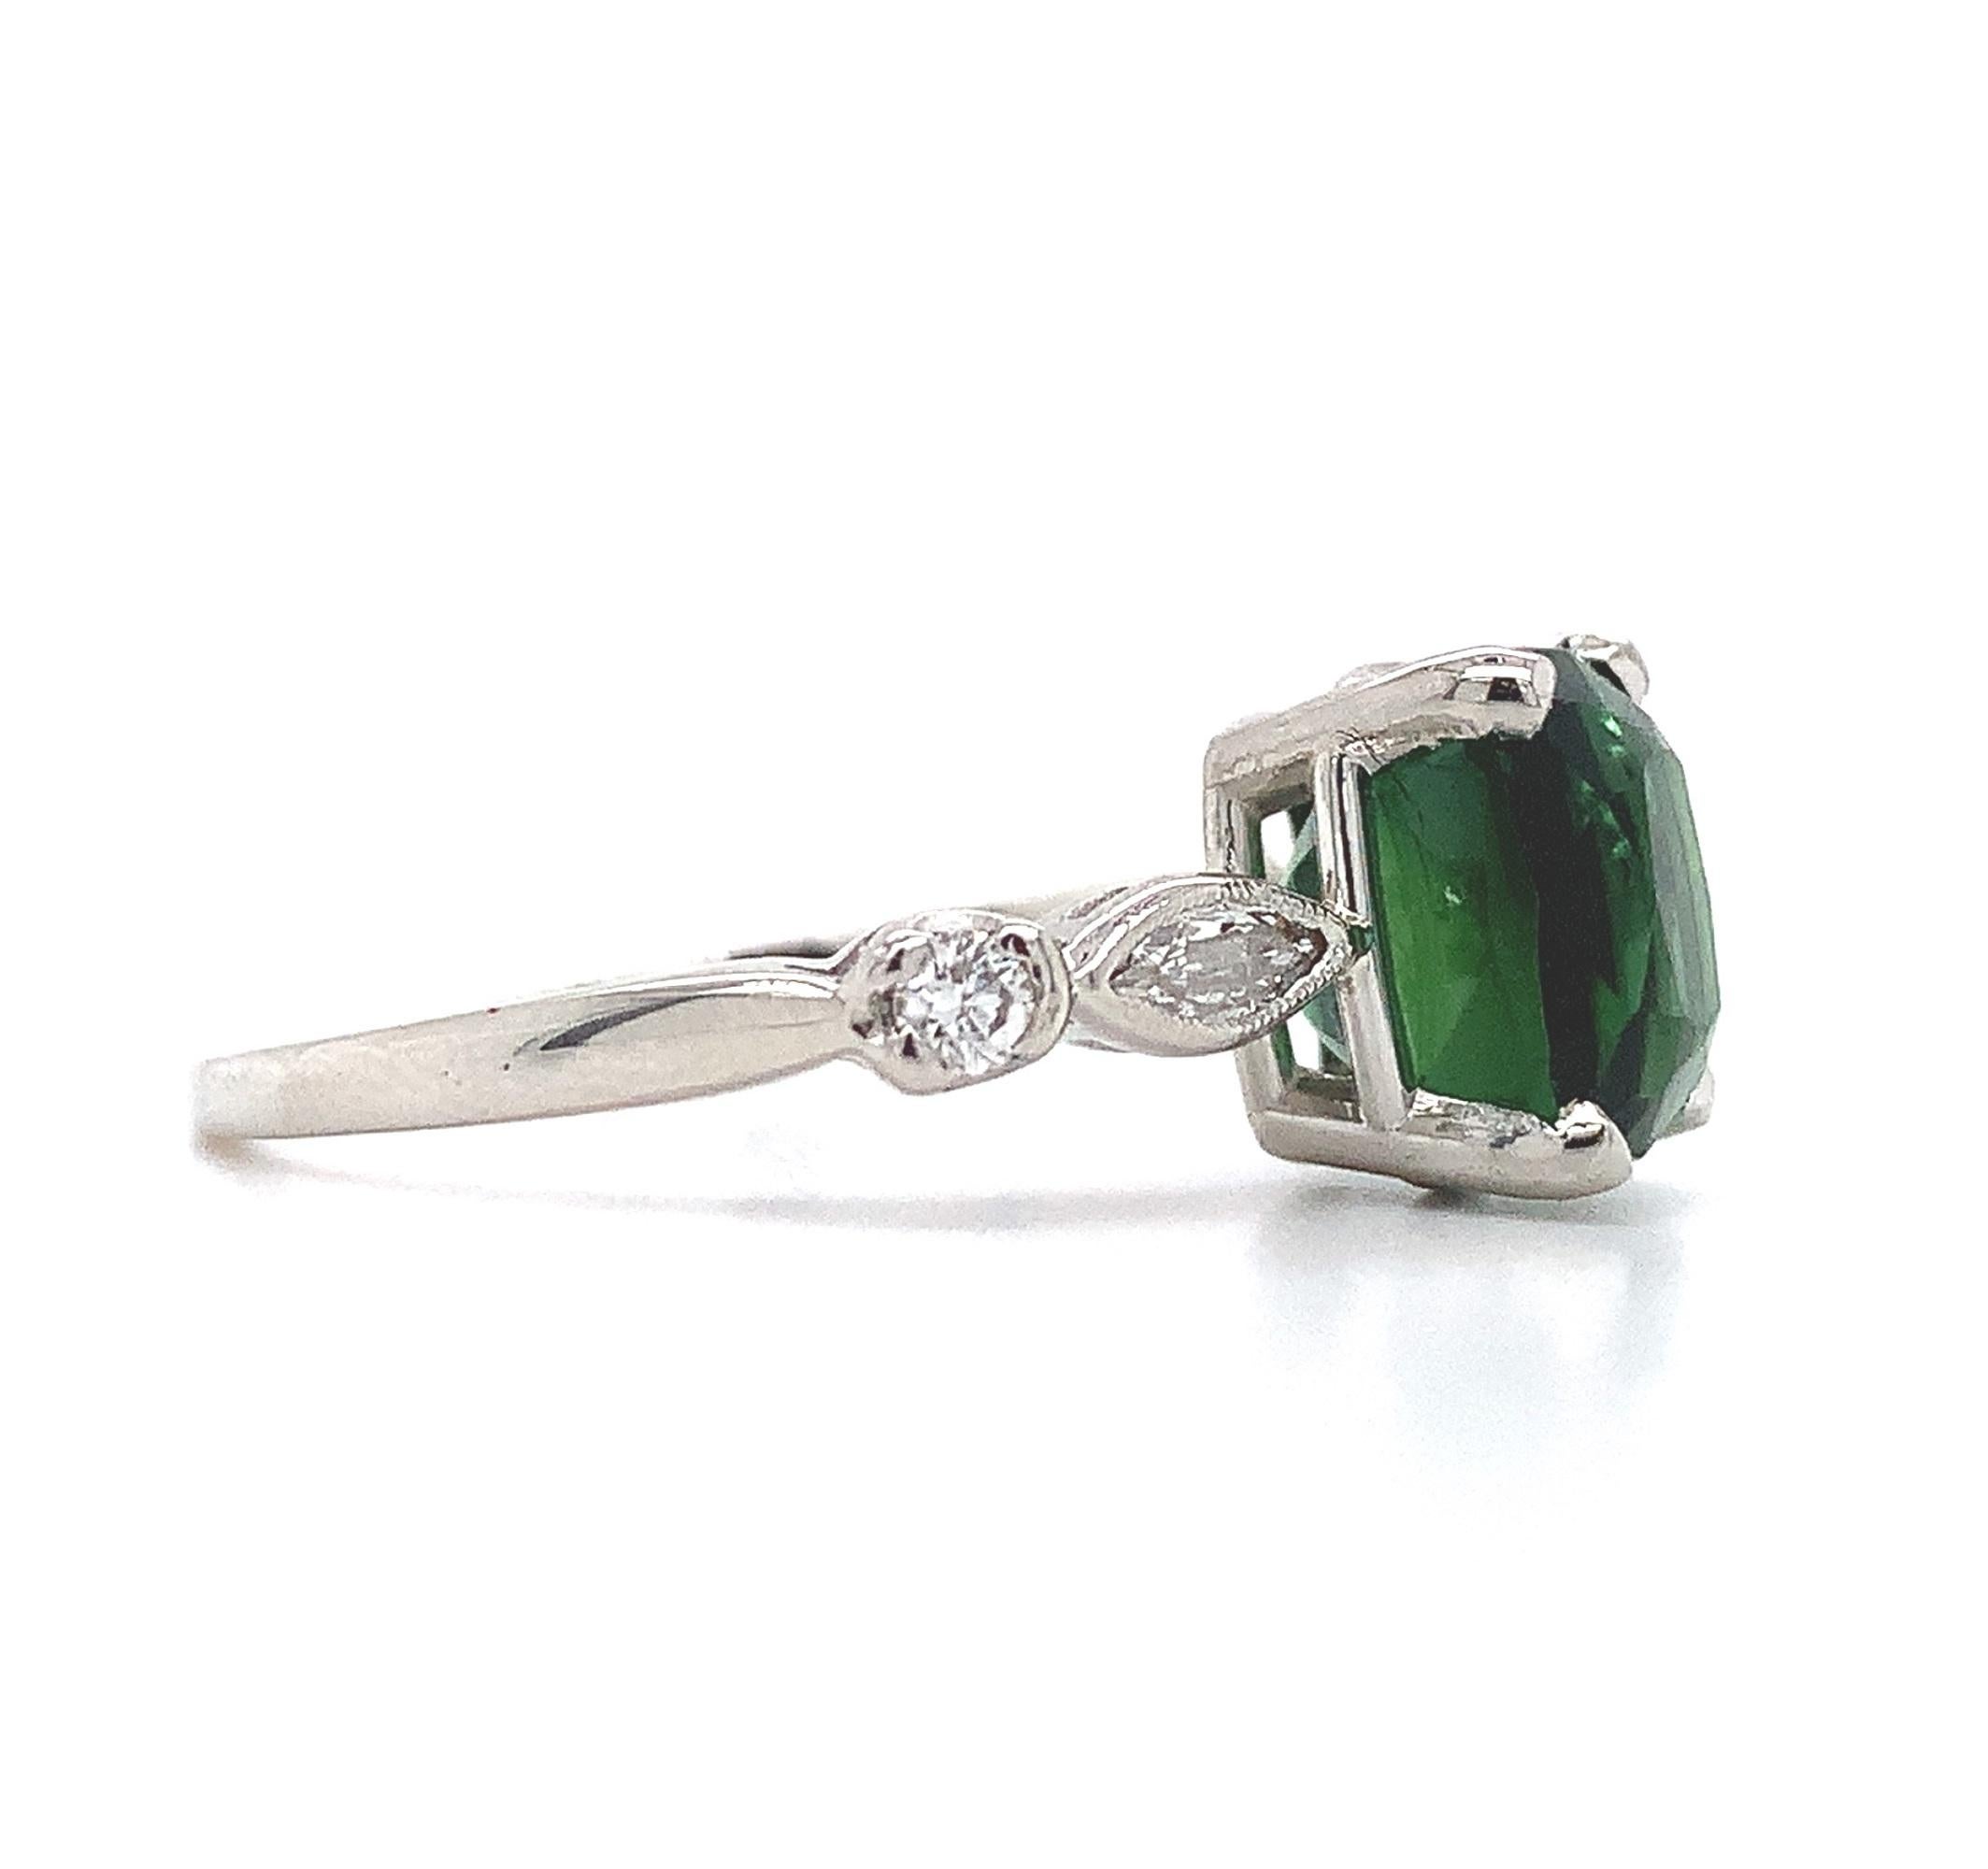  Platinum tourmaline and diamond ring featuring a rectangular cushion cut tourmaline weighing 3.24 carats. The tourmaline has chrome green color and fine clarity. It measures about 8.5mm x 7mm. The tourmaline is accented by 2 marquise diamonds and 2